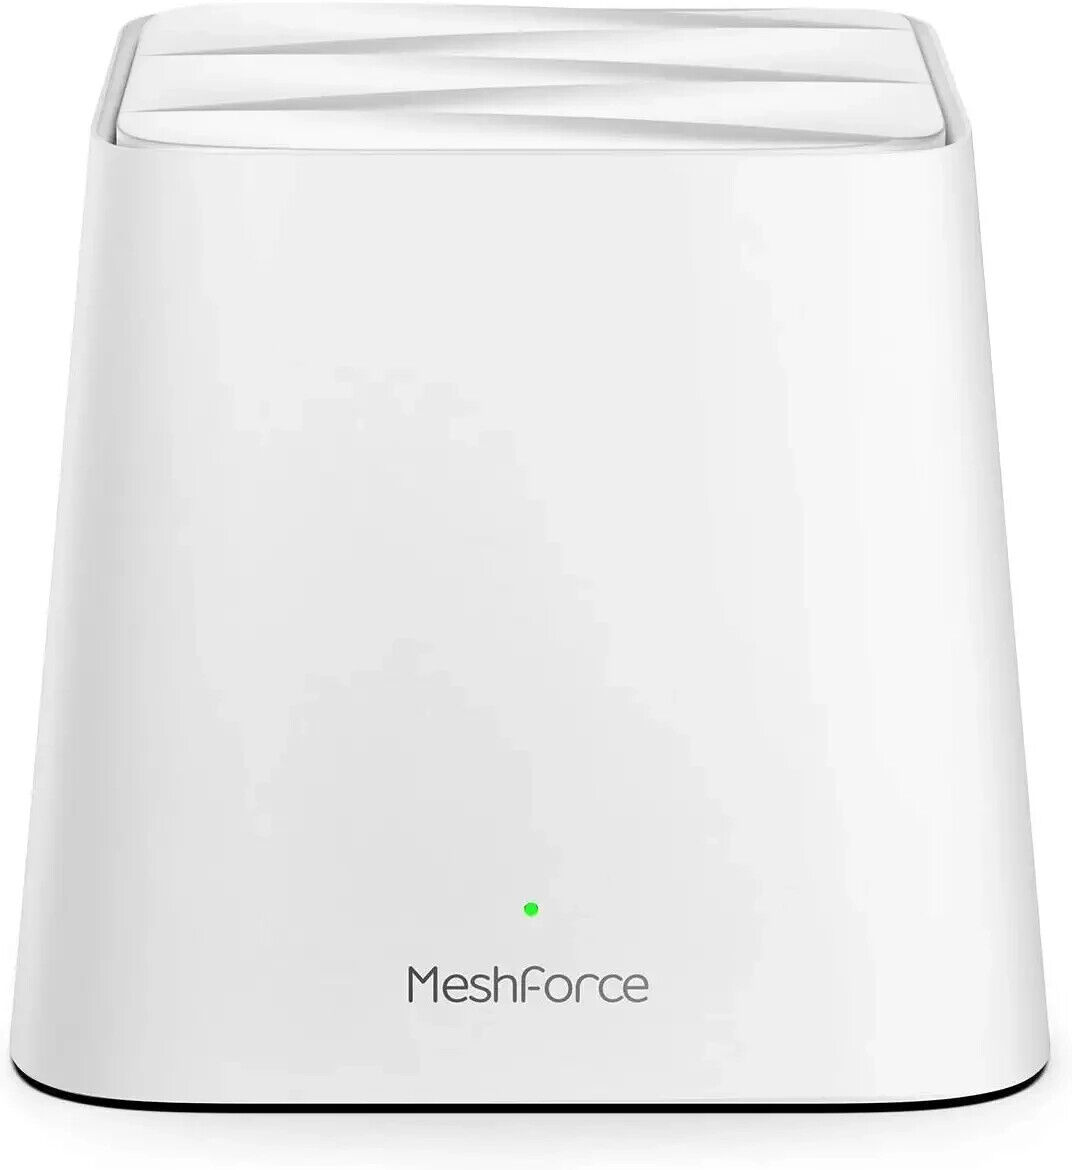 Meshforce M1 Whole Home Mesh WiFi System (1 Pack) Dual Band Wireless Mesh Router